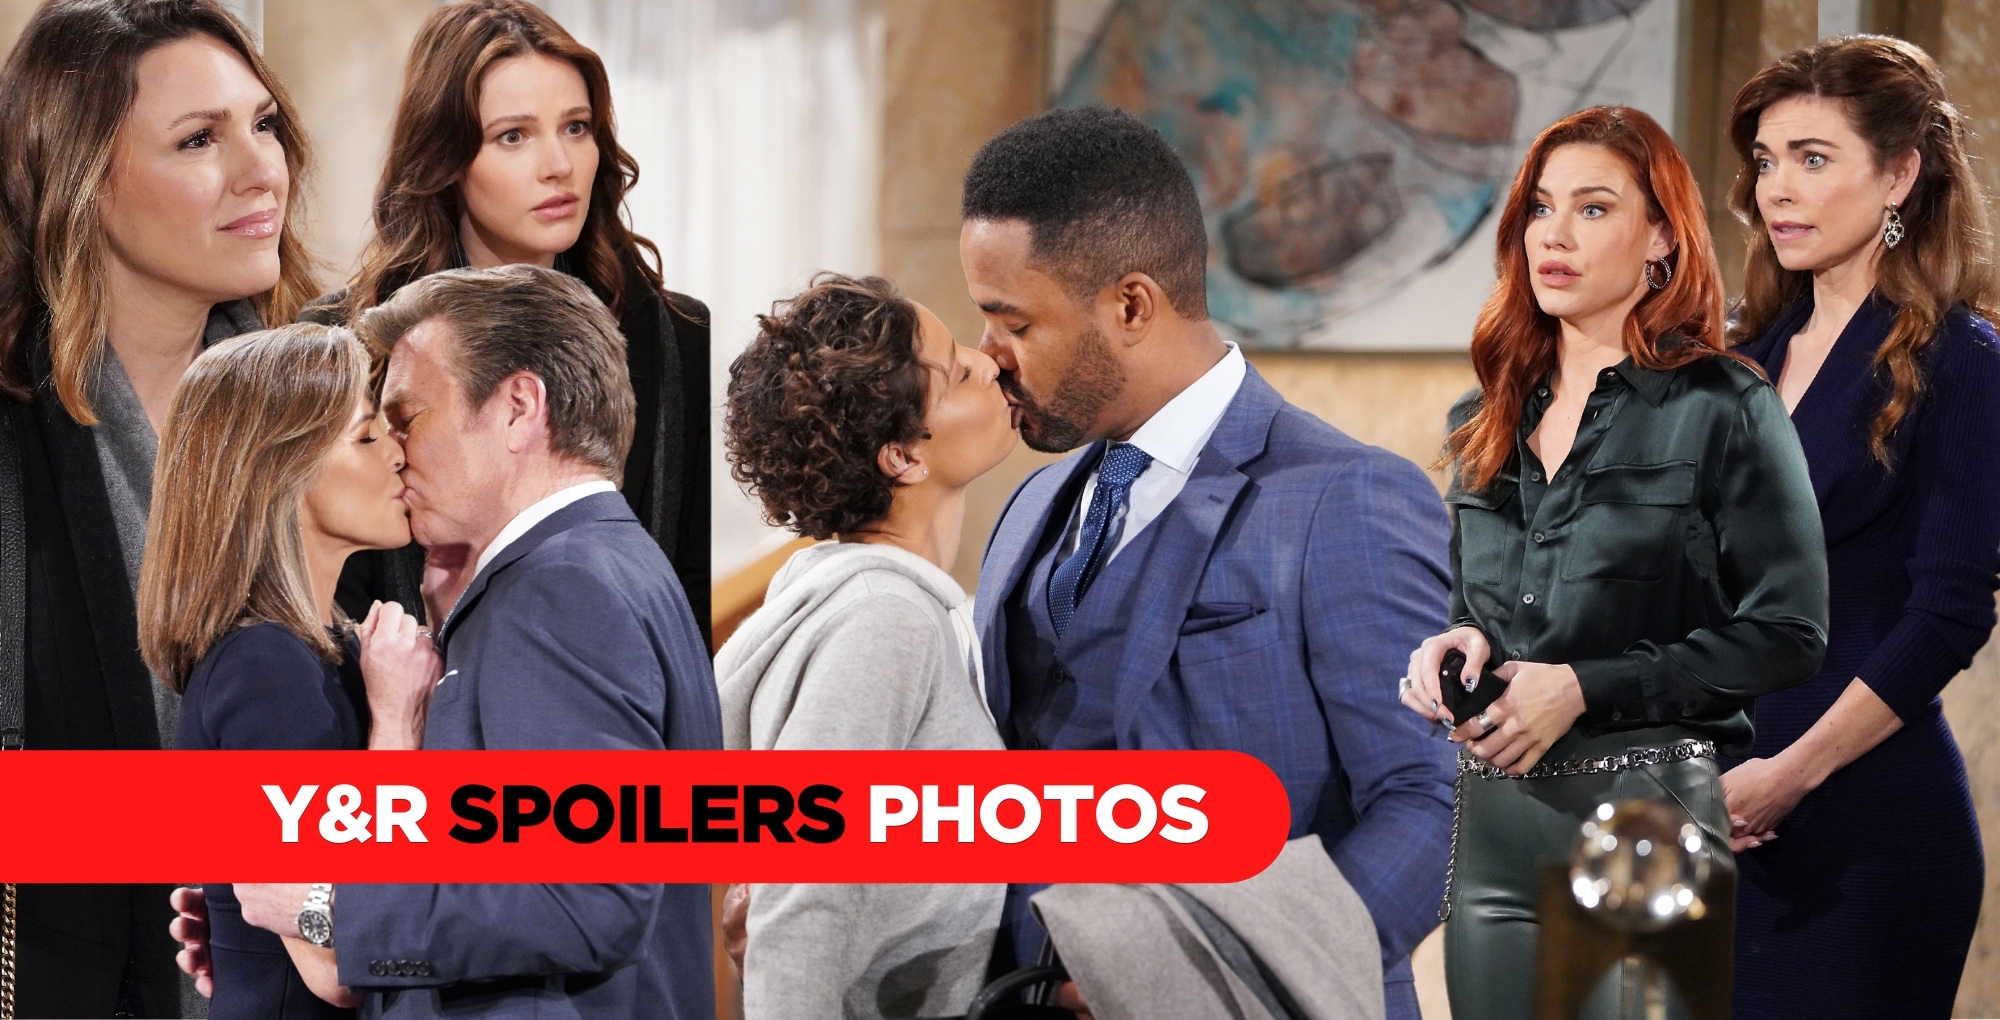 Y&R Spoilers Photos: Big Surprises And Romantic Moments